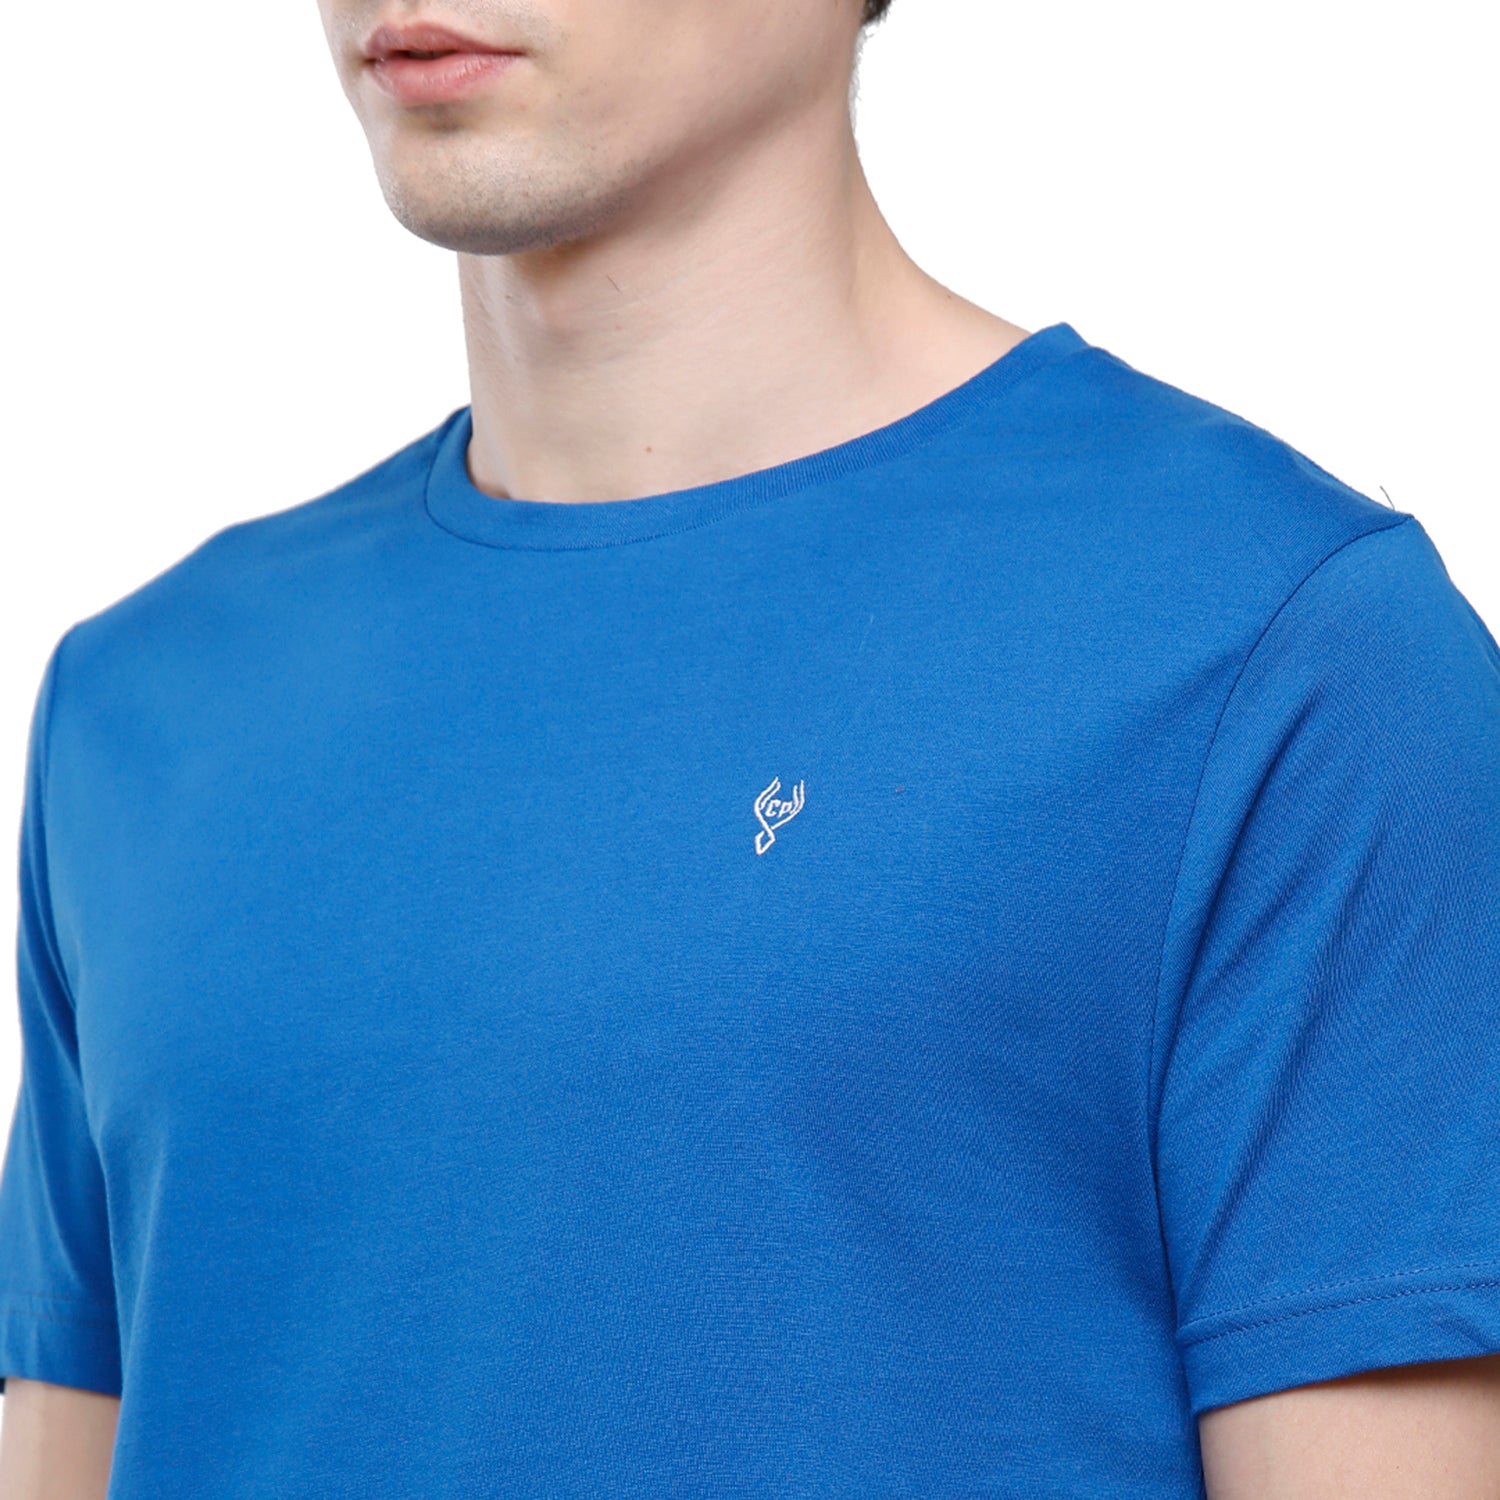 Classic Polo Men's Solid Single Jersey Blue Half Sleeve Slim Fit T-Shirt - Kore-06 T-shirt Classic Polo 